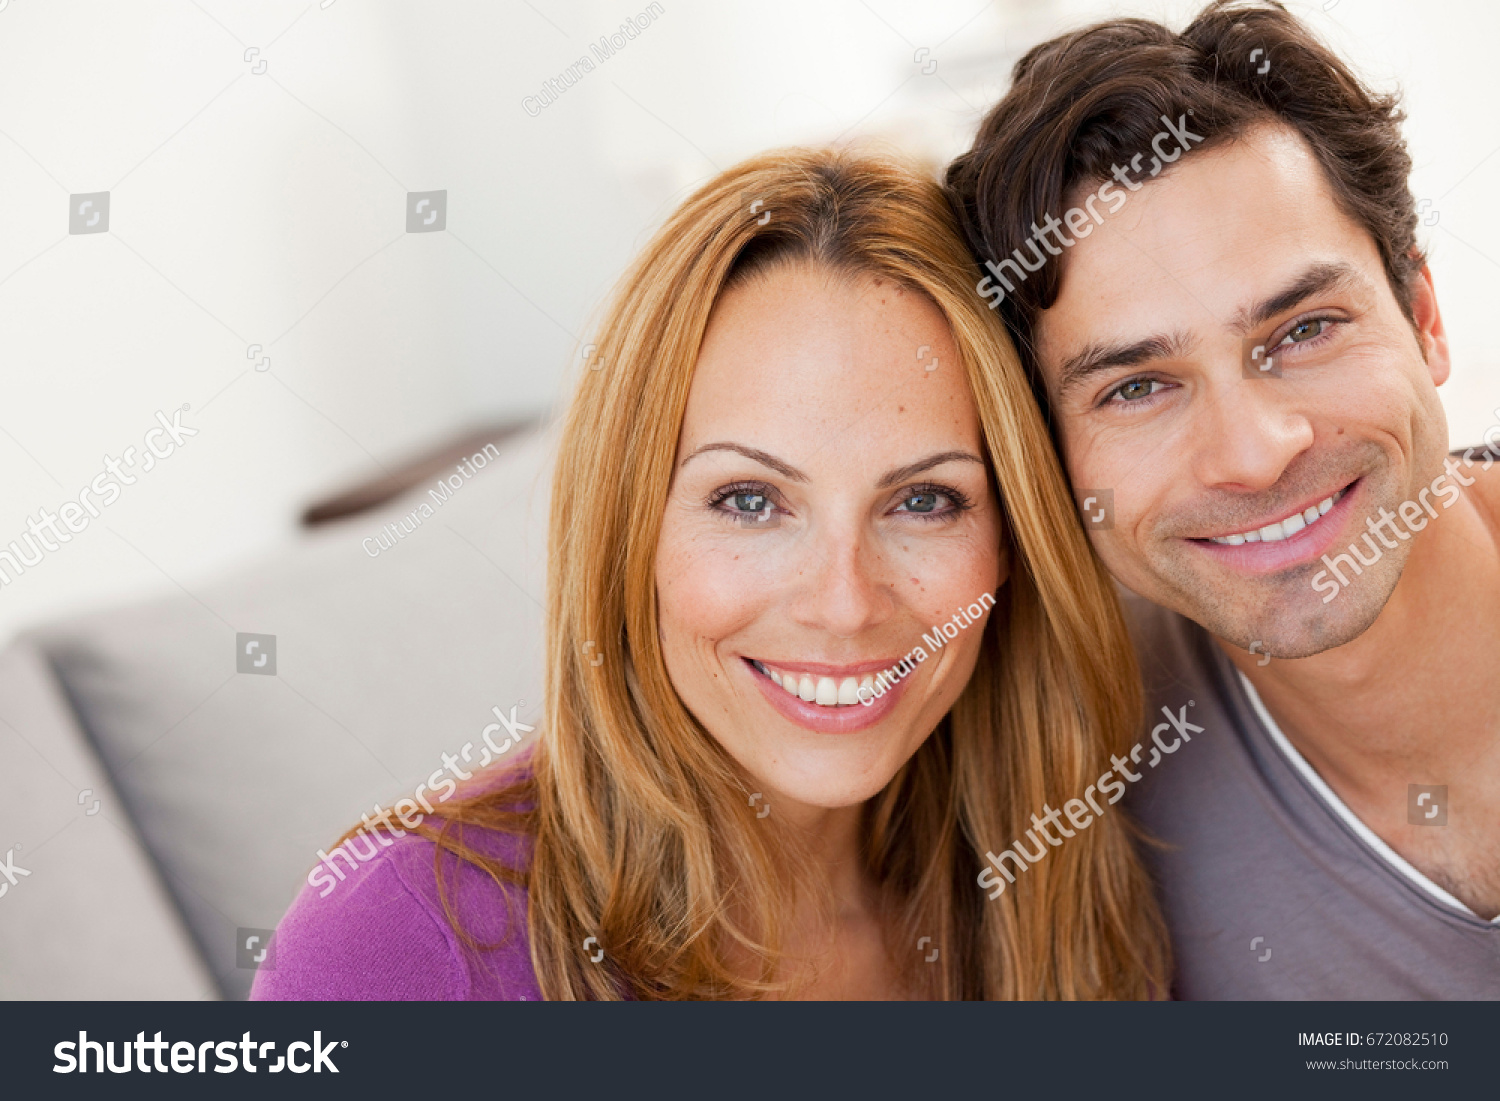 young couple smiling #672082510